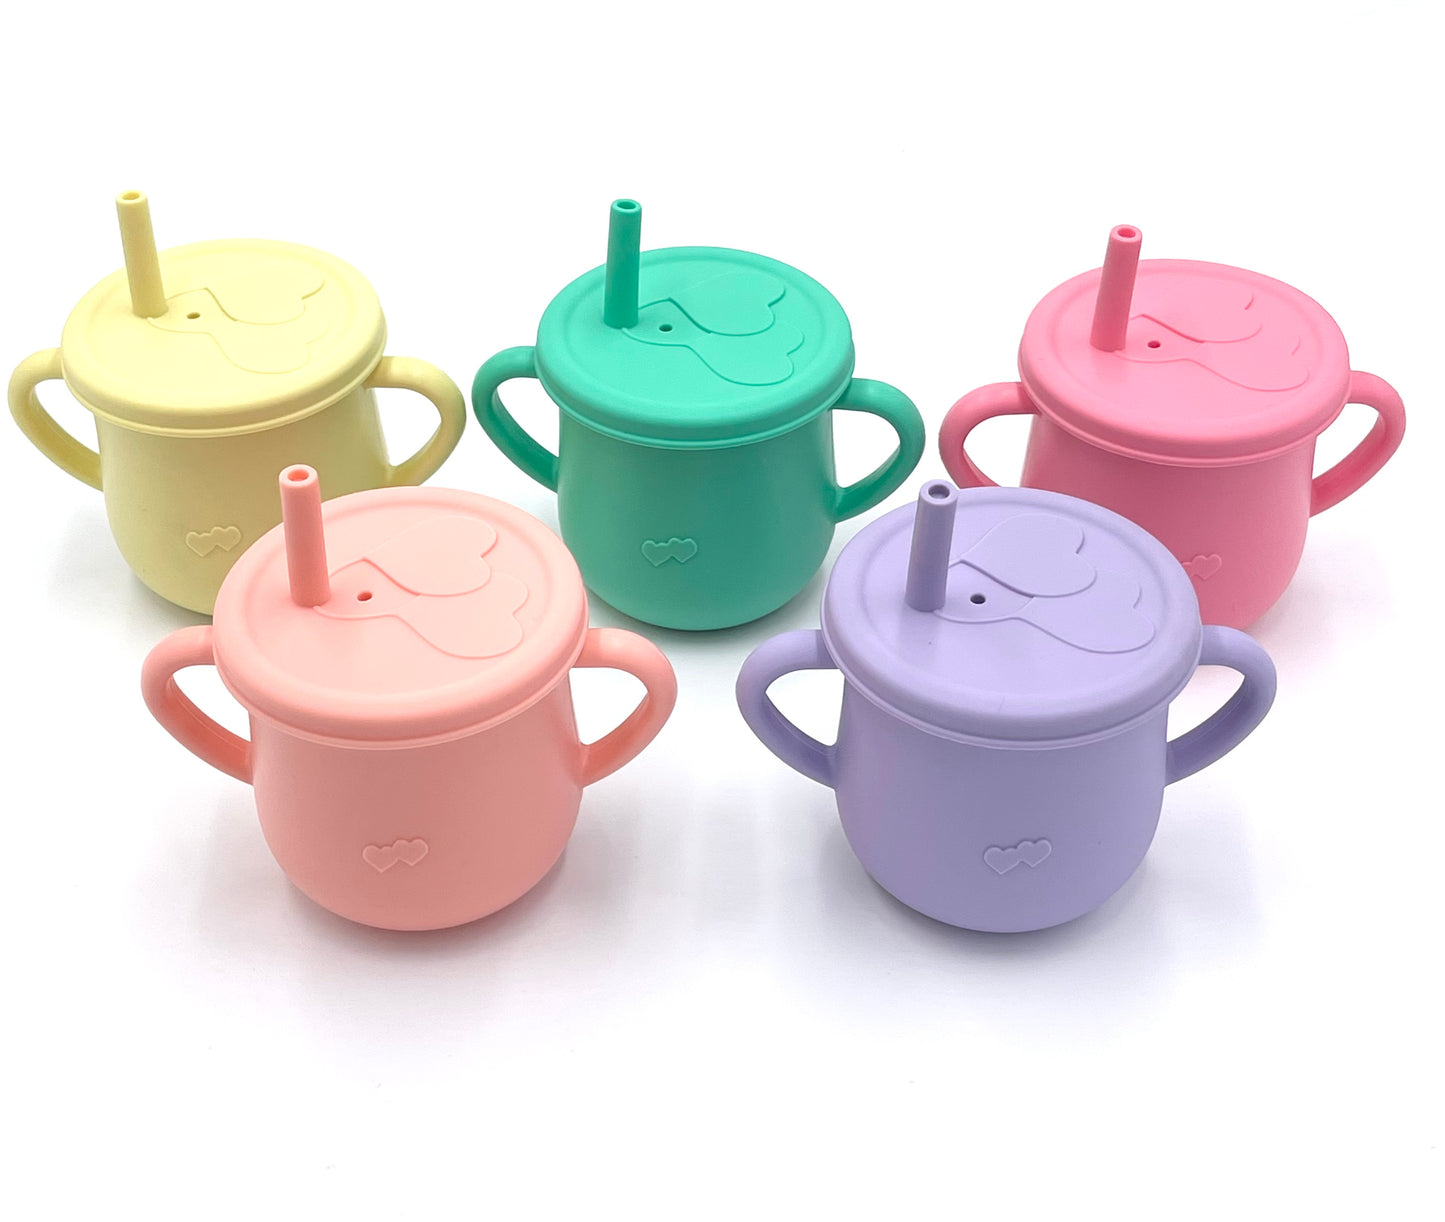 EVRI Sippy Snacky Cup Childs Snack Holder Drink Cup Kenya